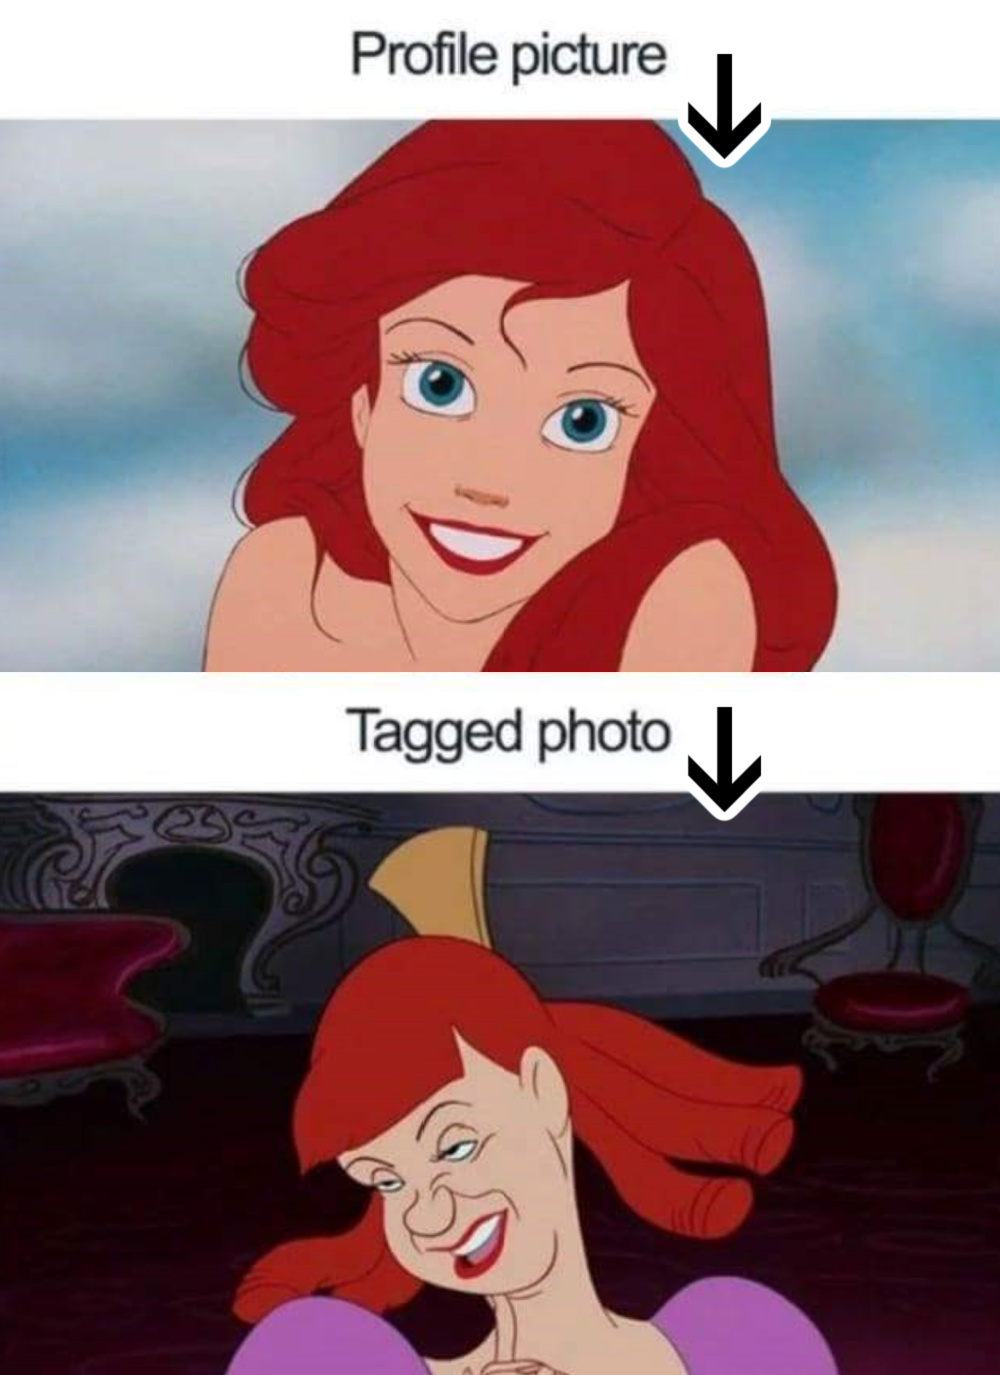 hilarious Disney meme with the little mermaid and ugly stepsister. - The Best Disney Memes On The Internet